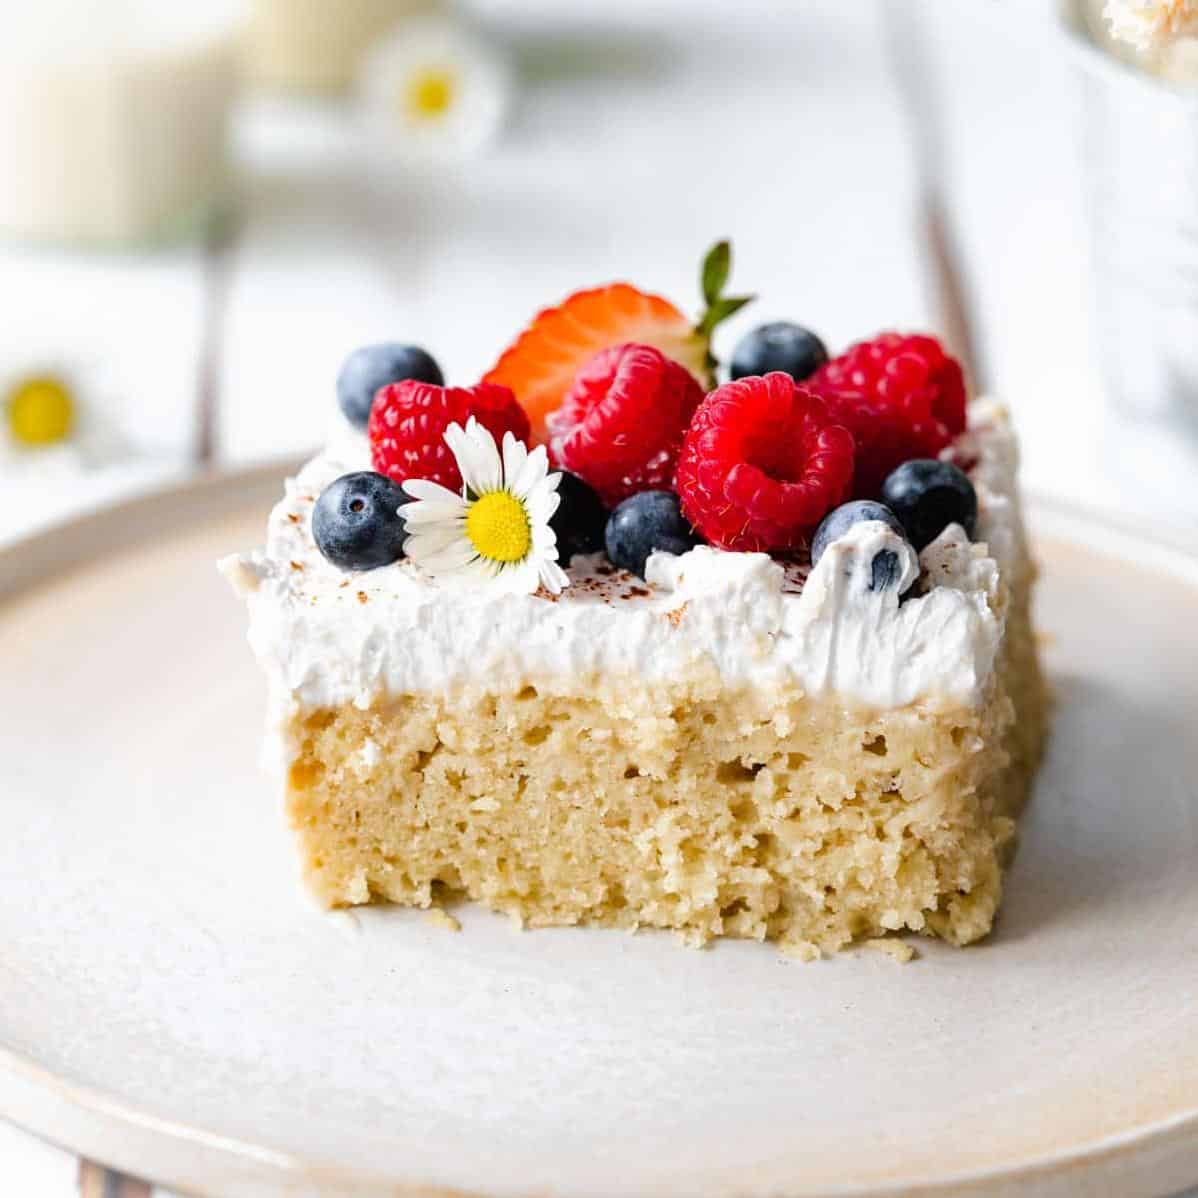  A vegan spin on the classic tres leches cake, perfect for plant-based eaters.